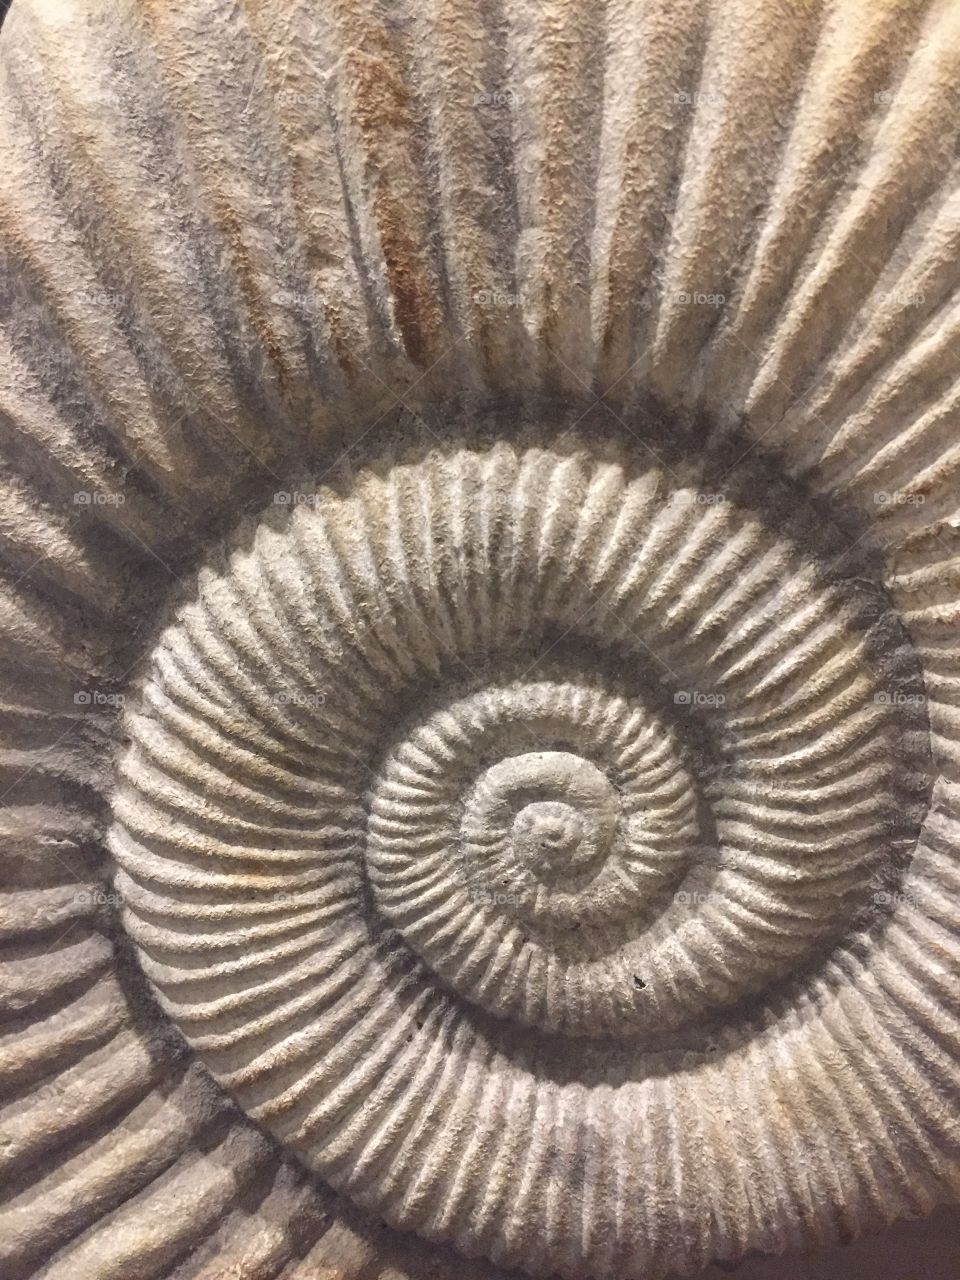 The sacred geometry of the fossil is just so amazing. The golden ratio of everything in existence❤️